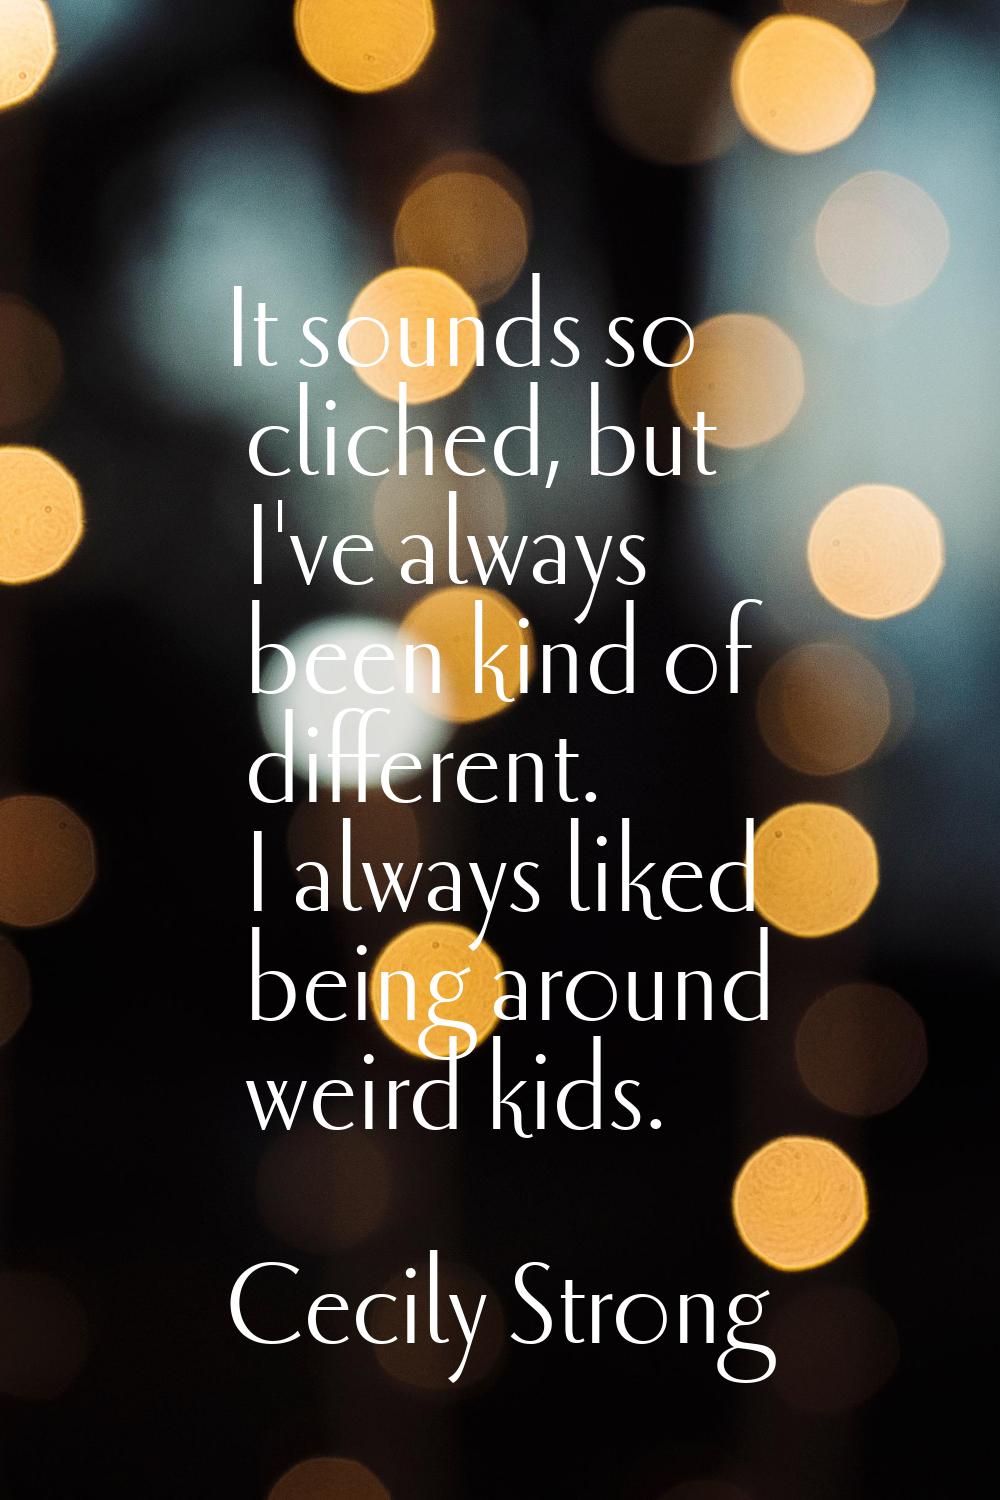 It sounds so cliched, but I've always been kind of different. I always liked being around weird kid